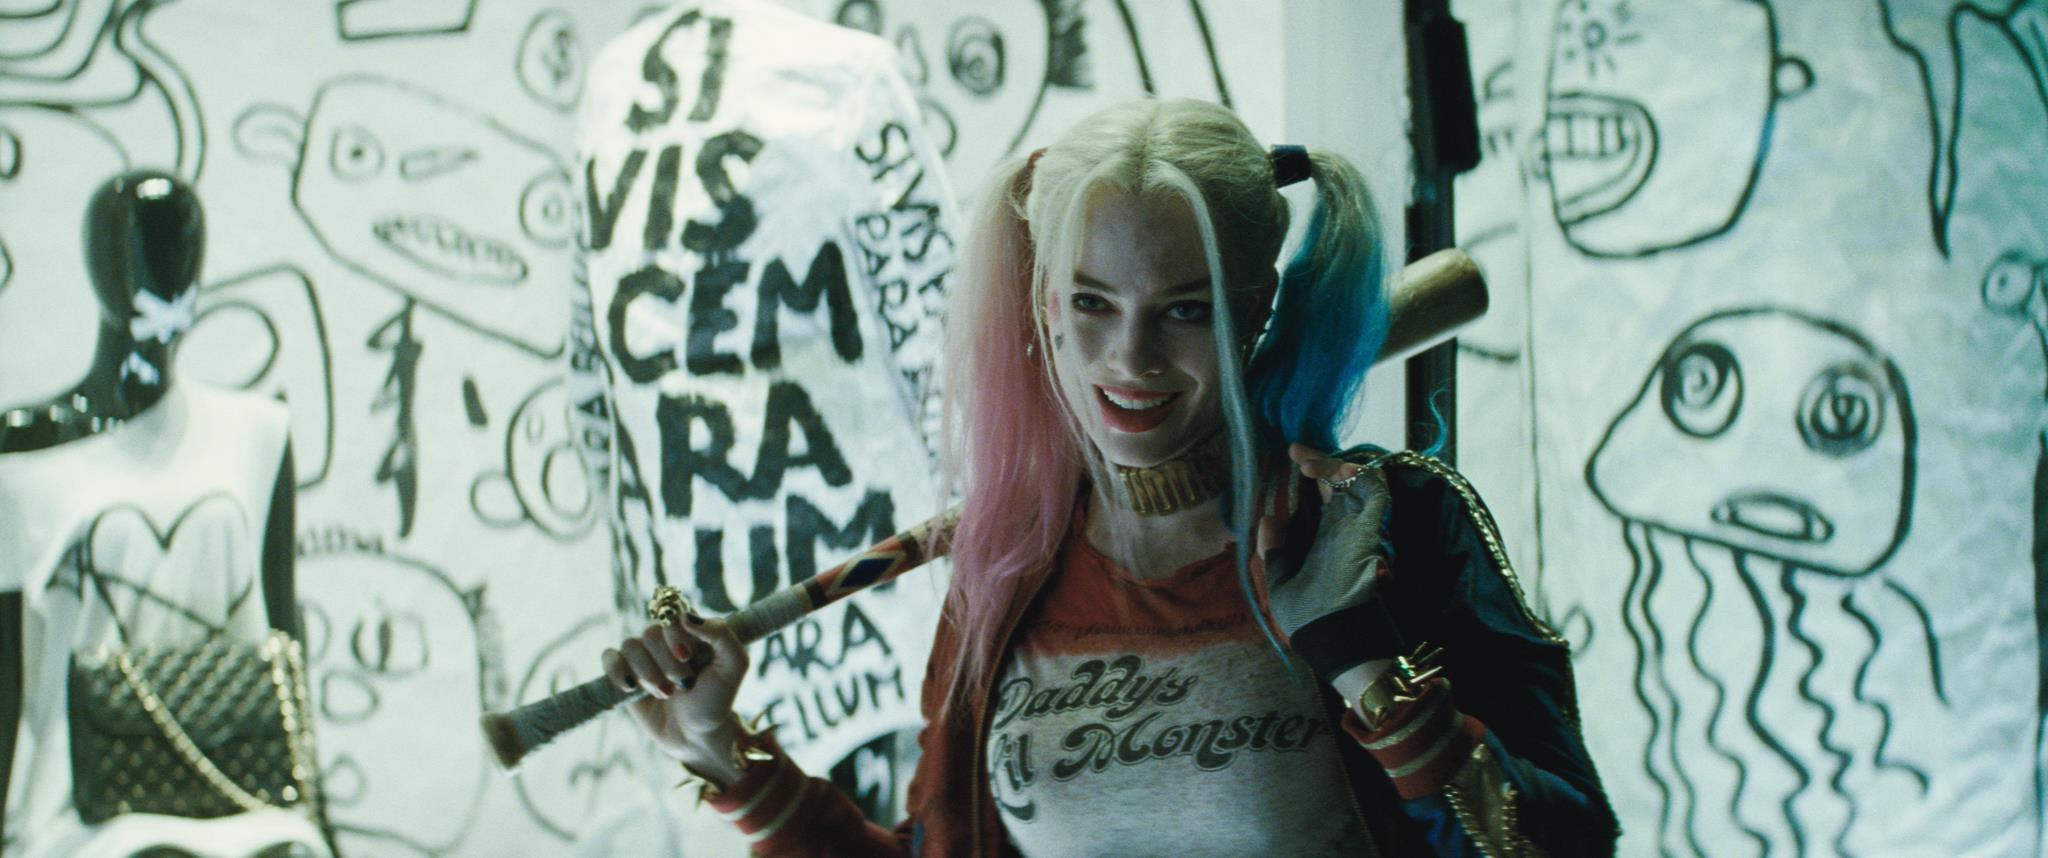 First Birds of Prey Harley Quinn Image Released